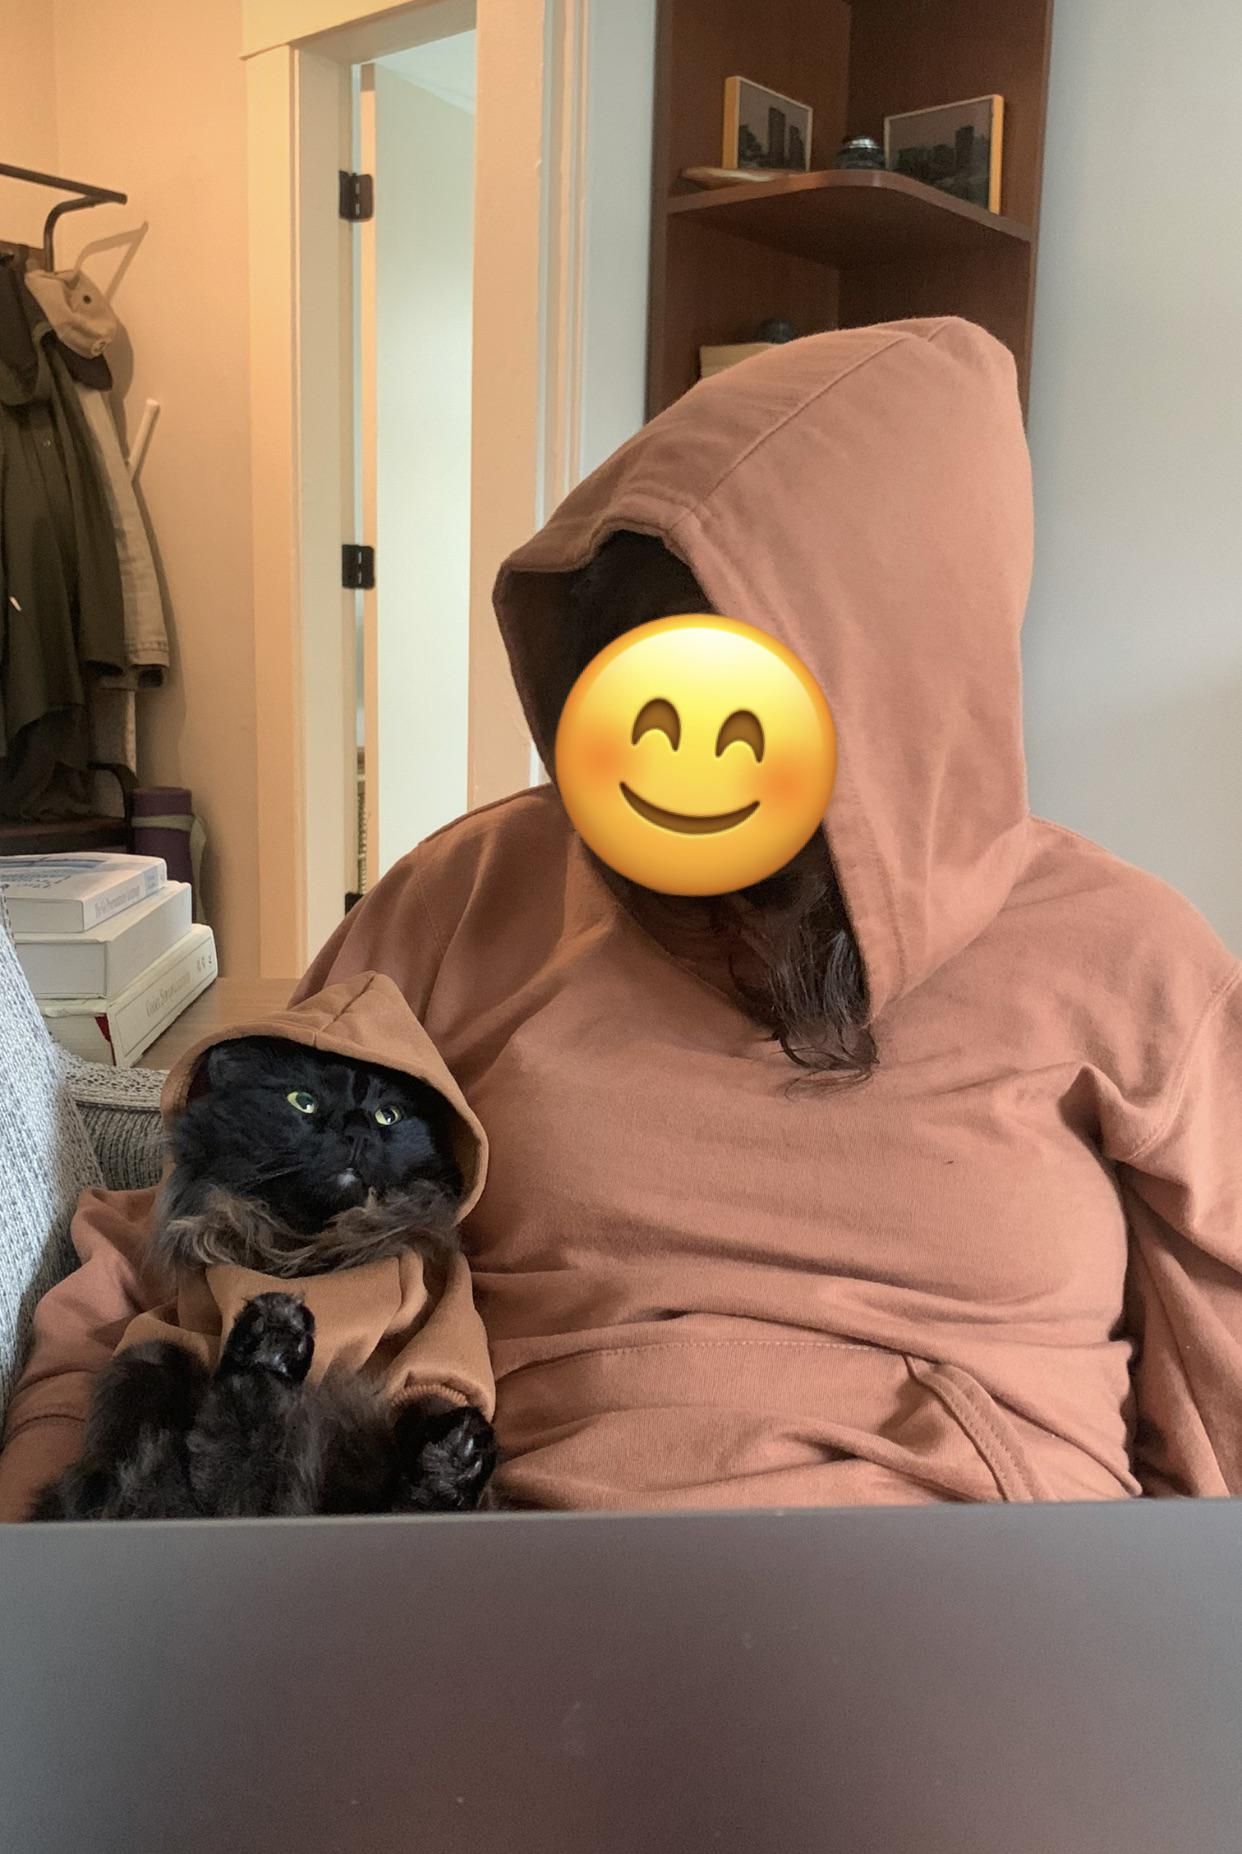 Came home to my girlfriend and cat in matching outfits.